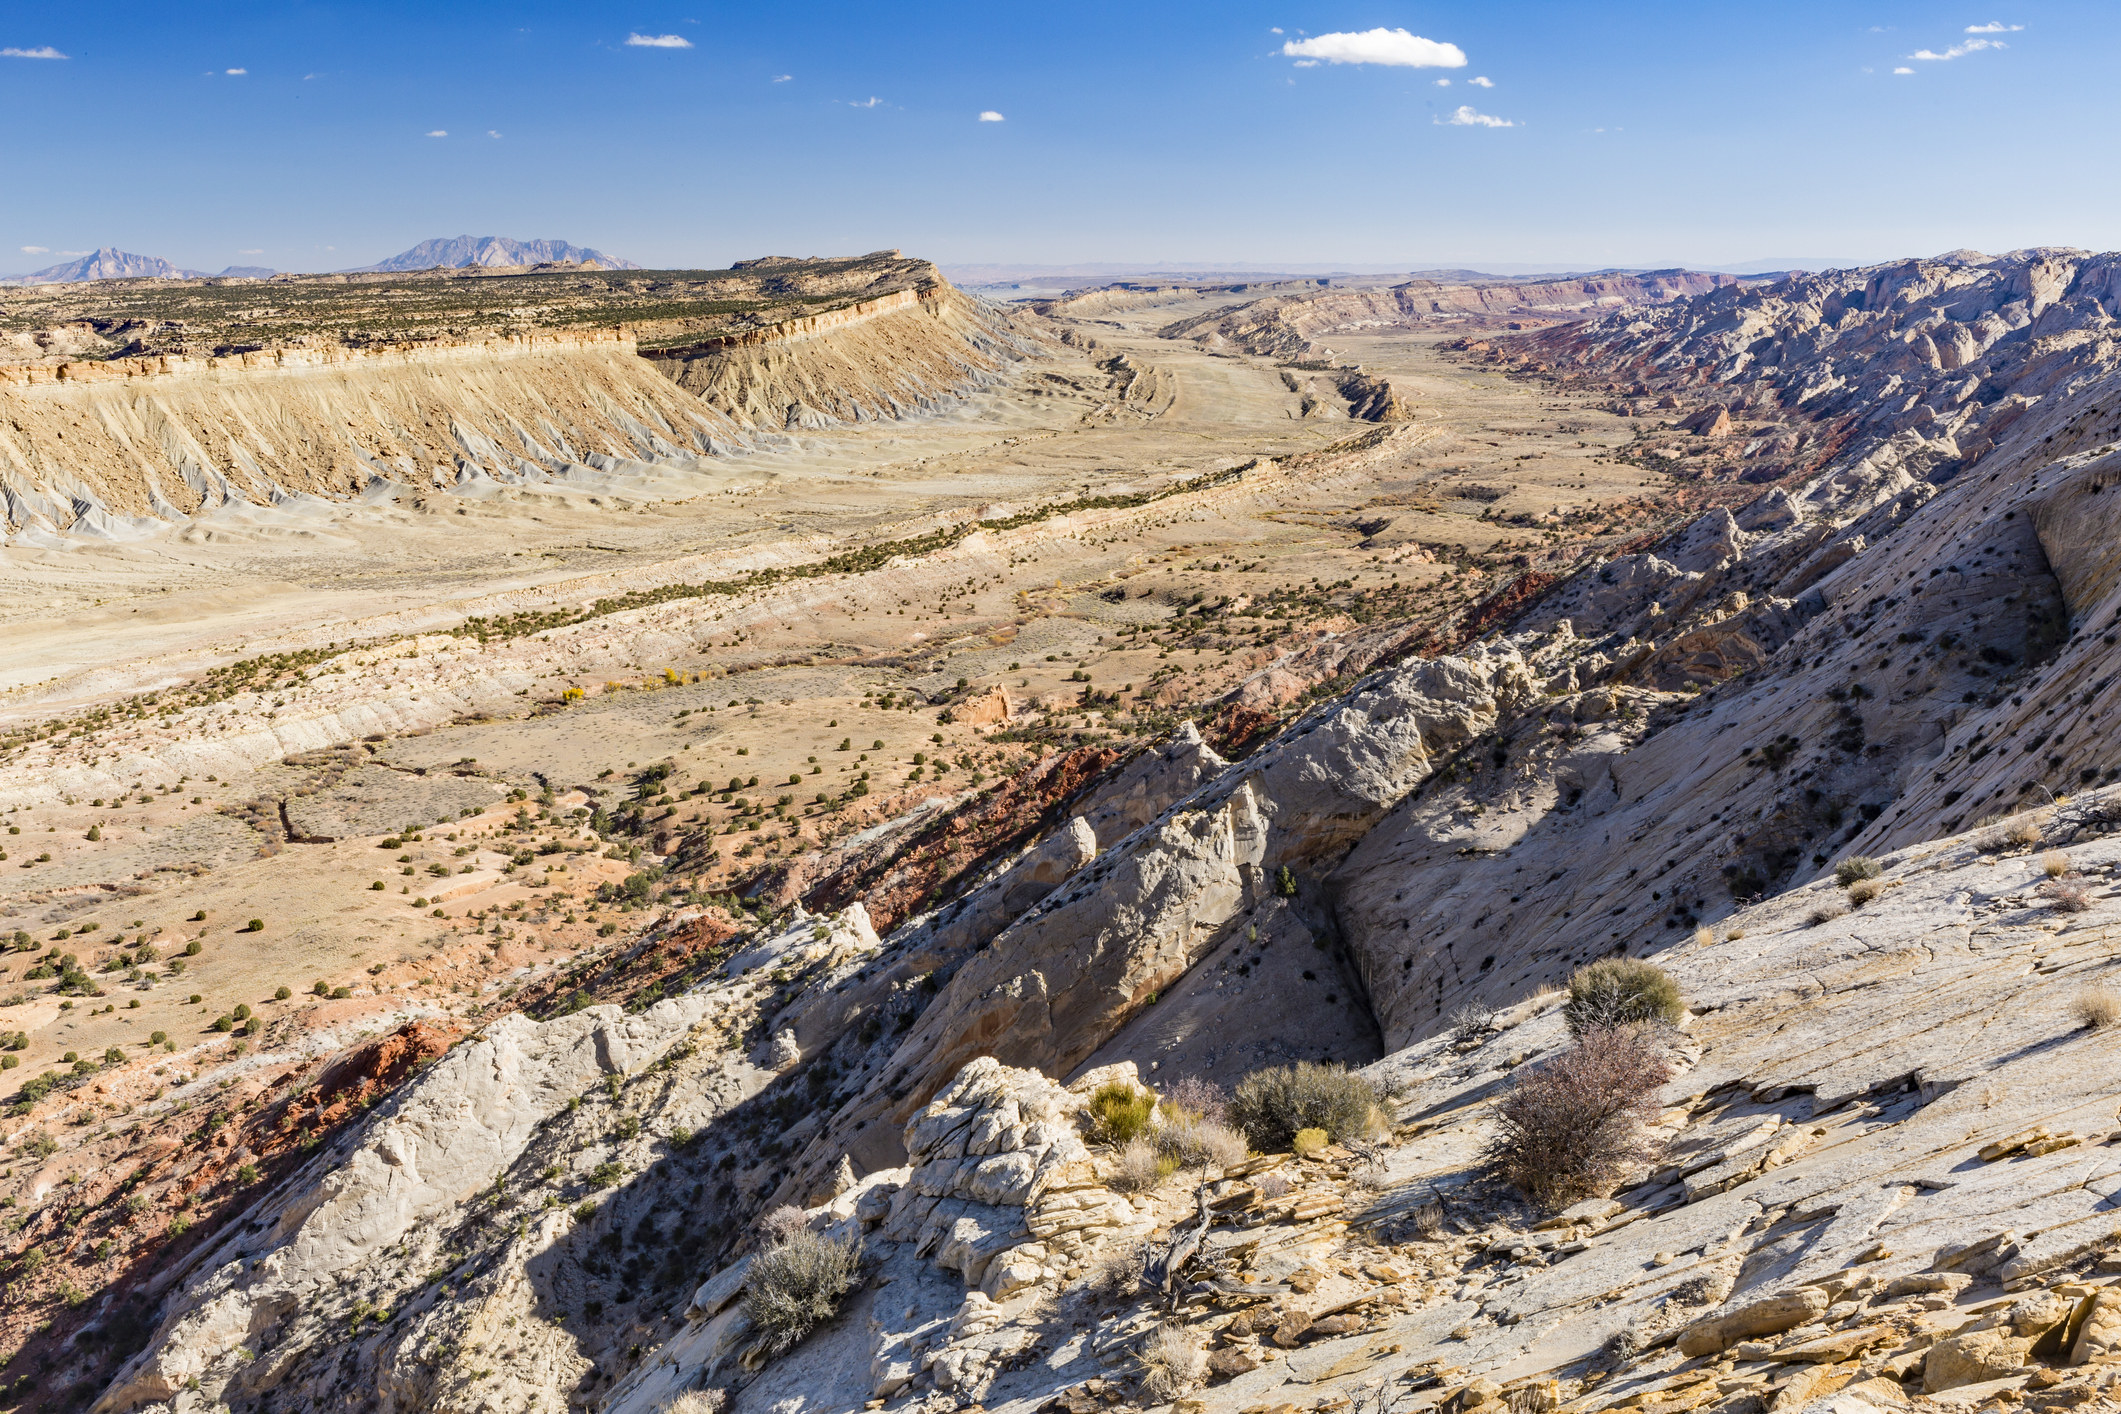 Expansive view of the Waterpocket Fold from the Strike Valley Overlook